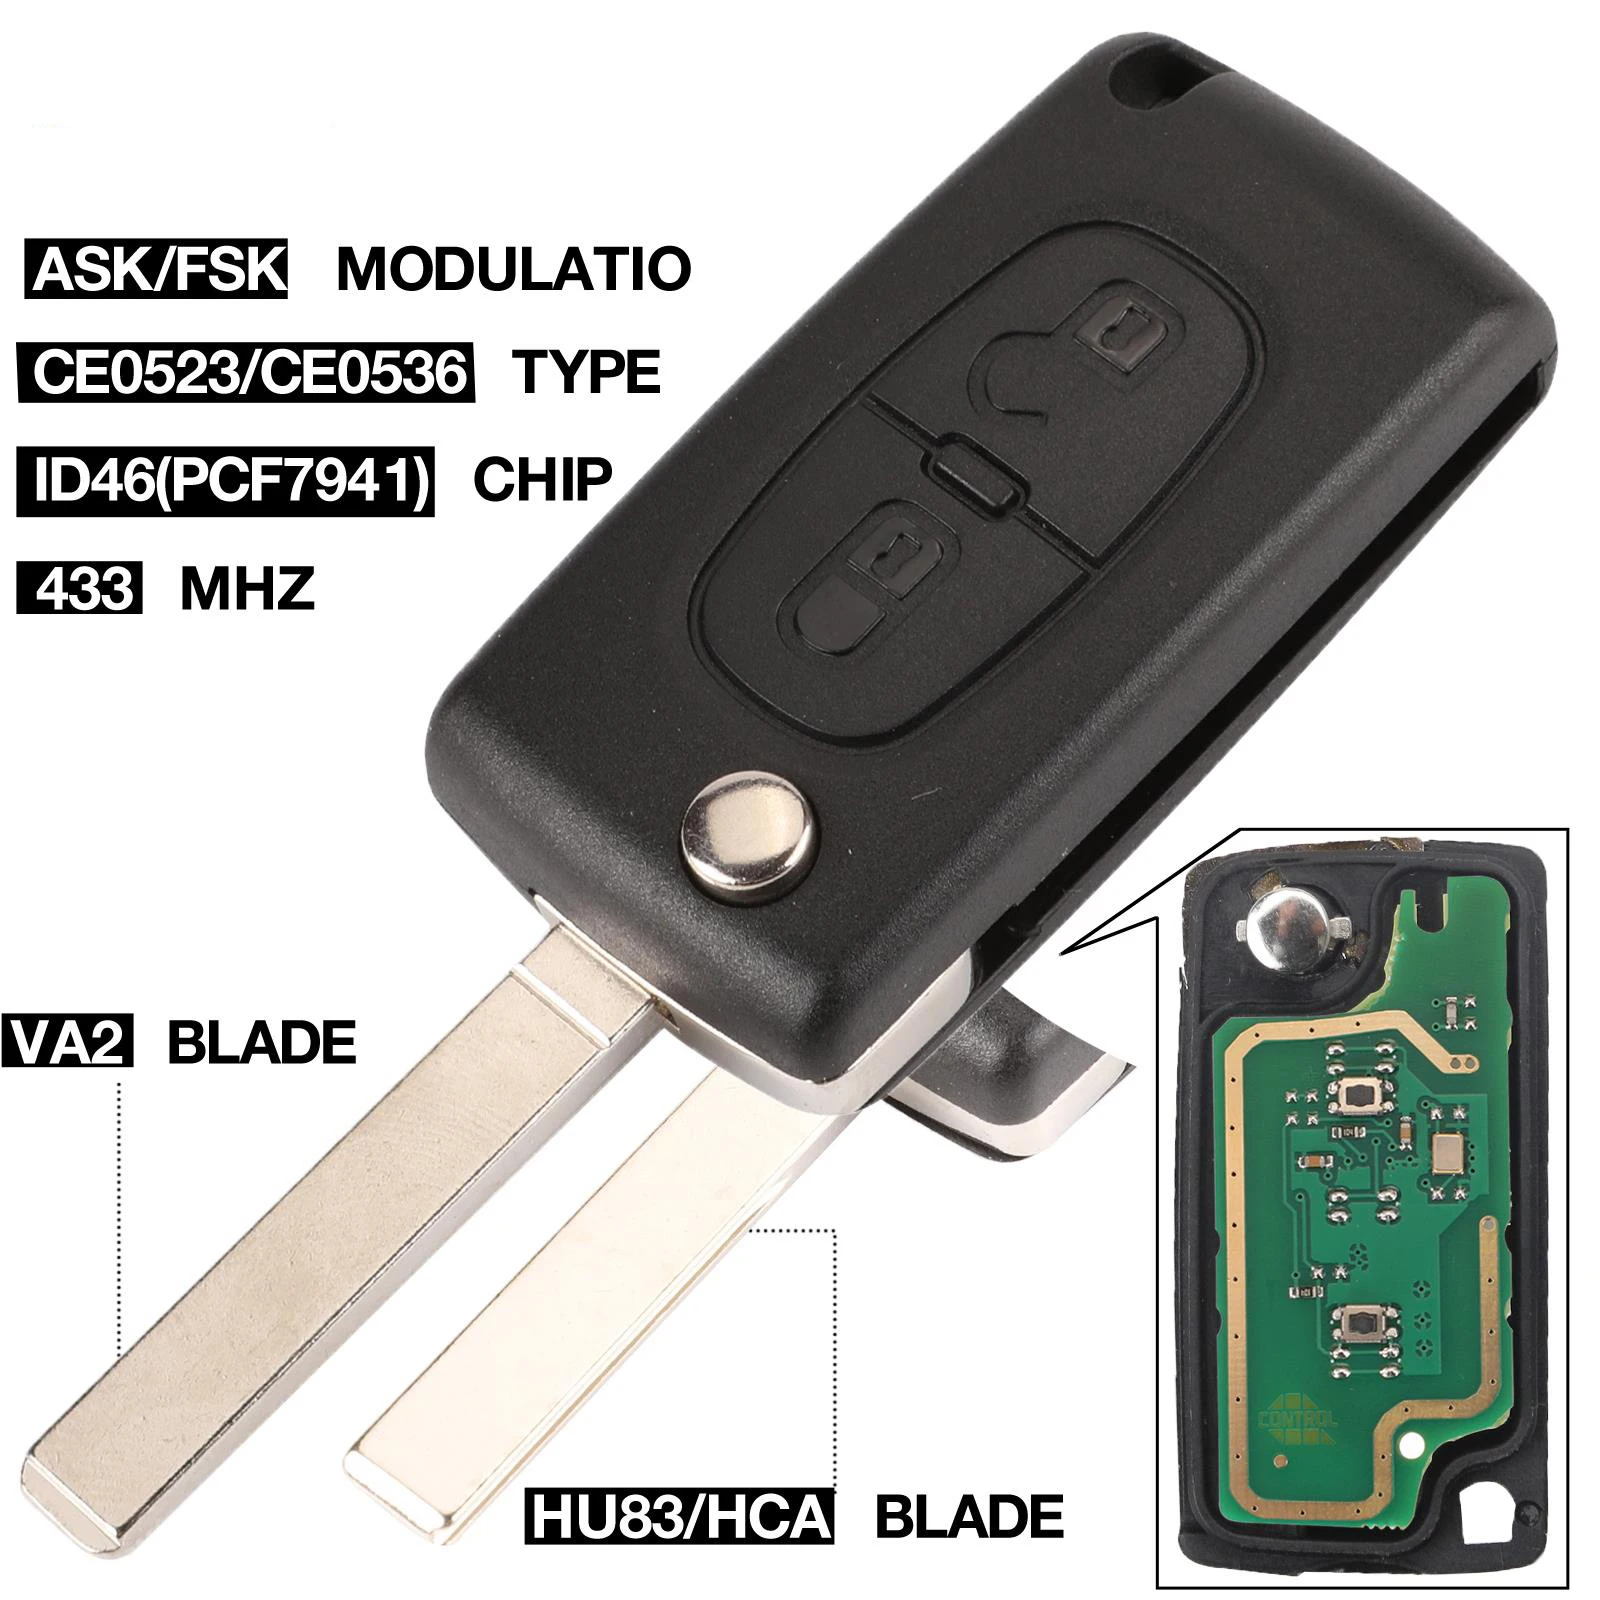 jingyuqin 434Mhz FSK/ASK 2 Buttons Flip Key For Peugeot 107 207 307 307S 308 407 607 Remote Control Fob PCF7961 PCF7941 Chip